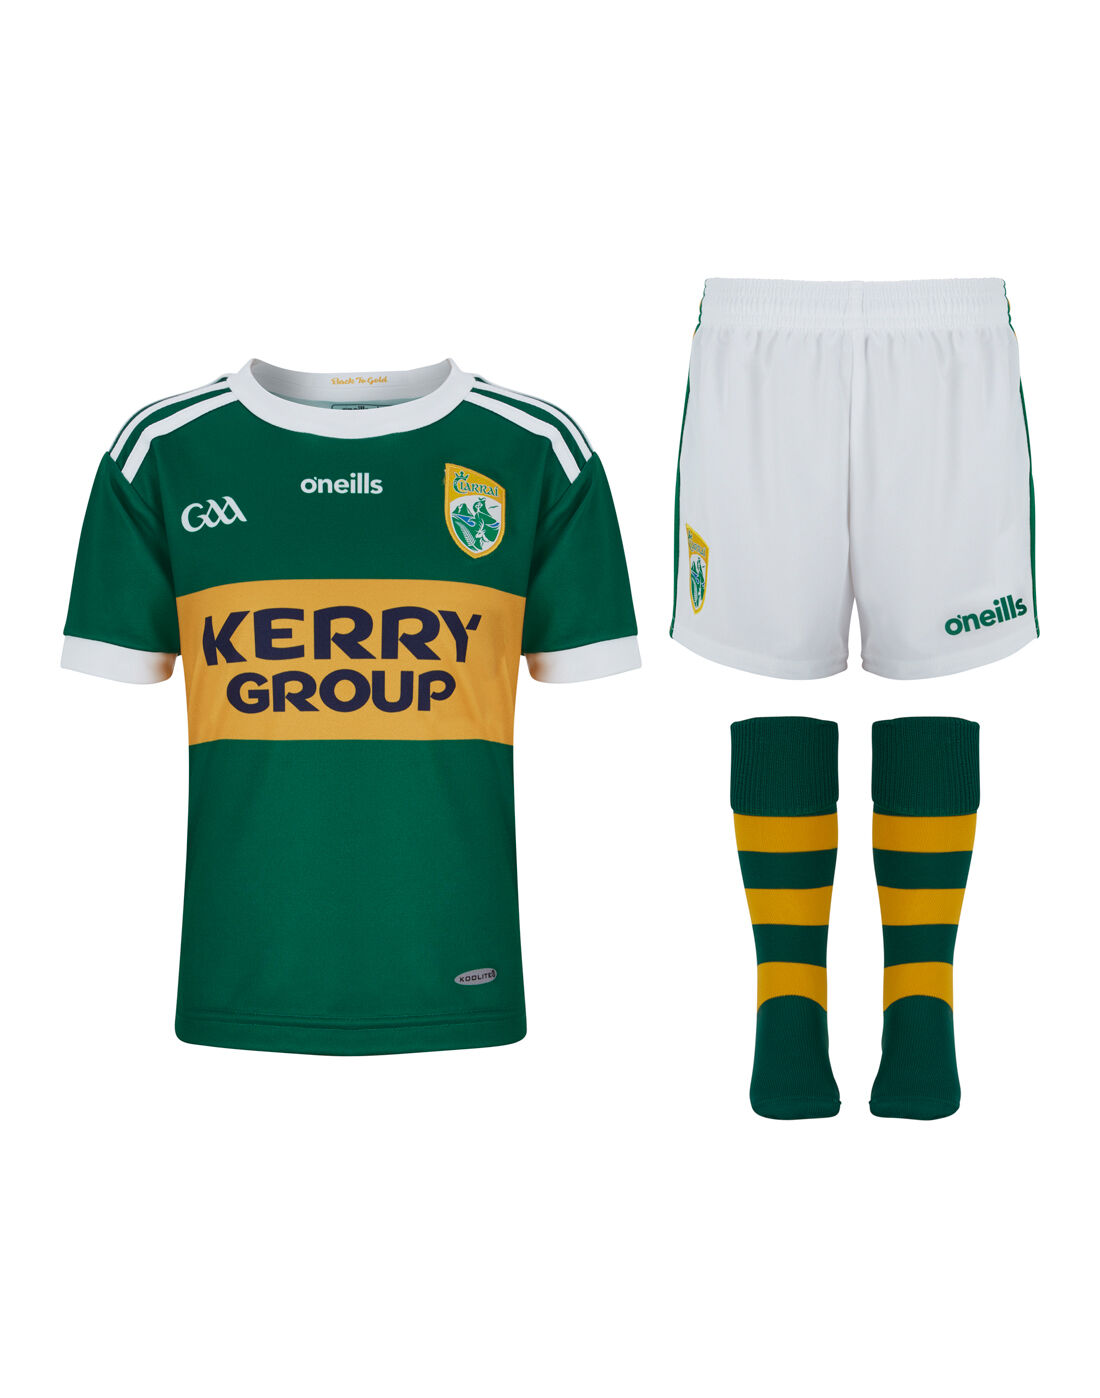 new kerry jersey 2018